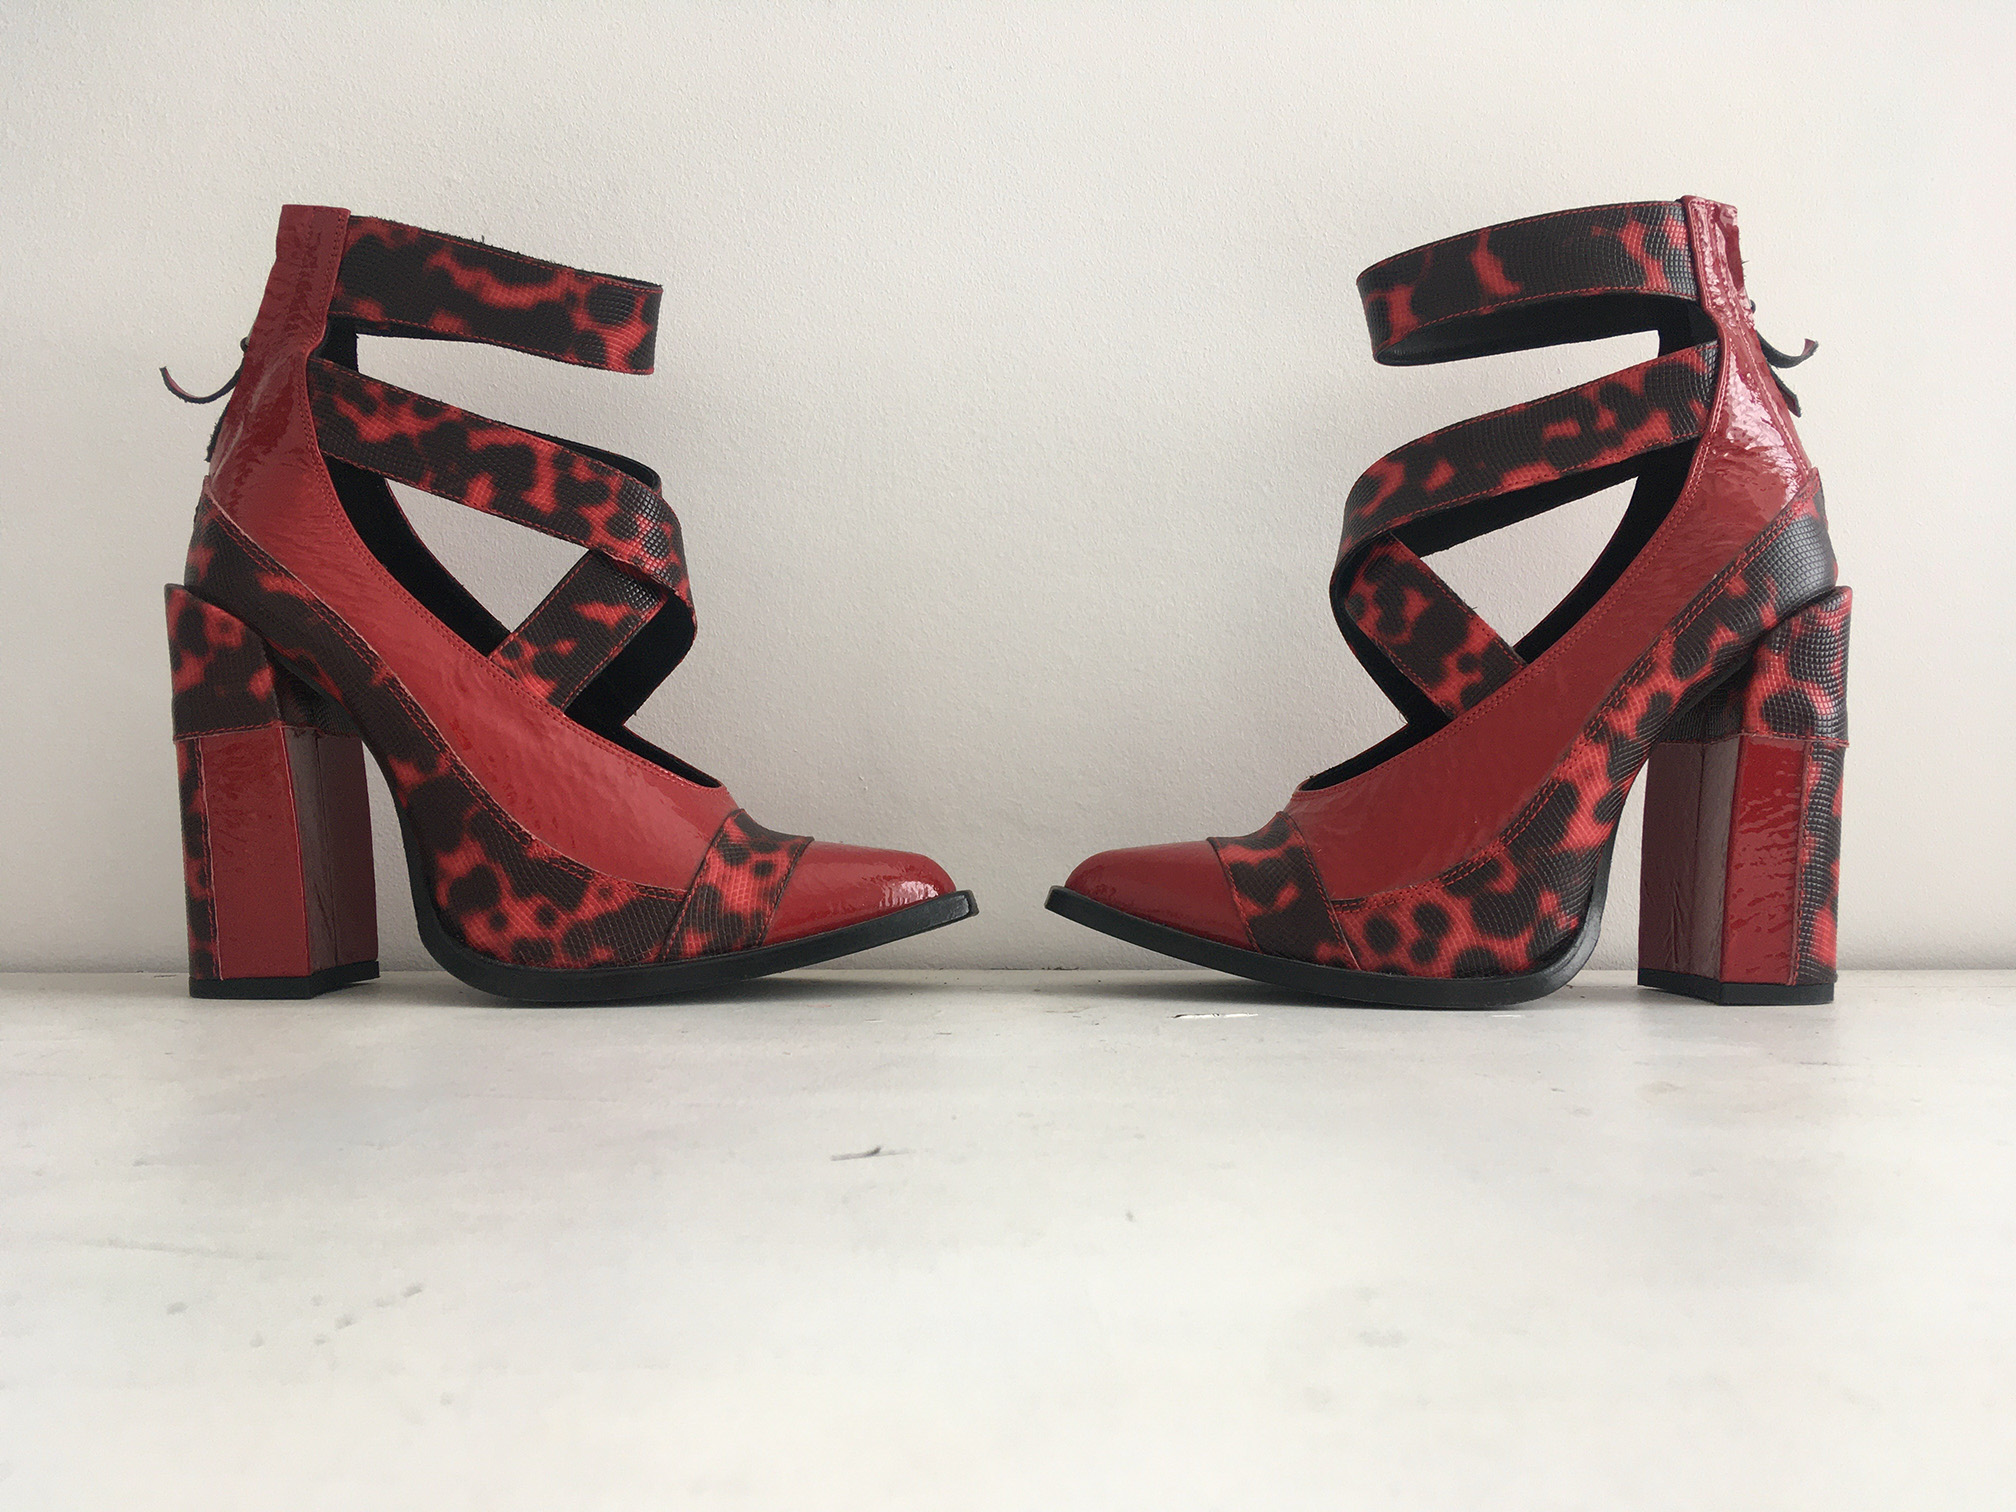 A photograph of 2 red high heeled shoes, facing each other against a white wall.